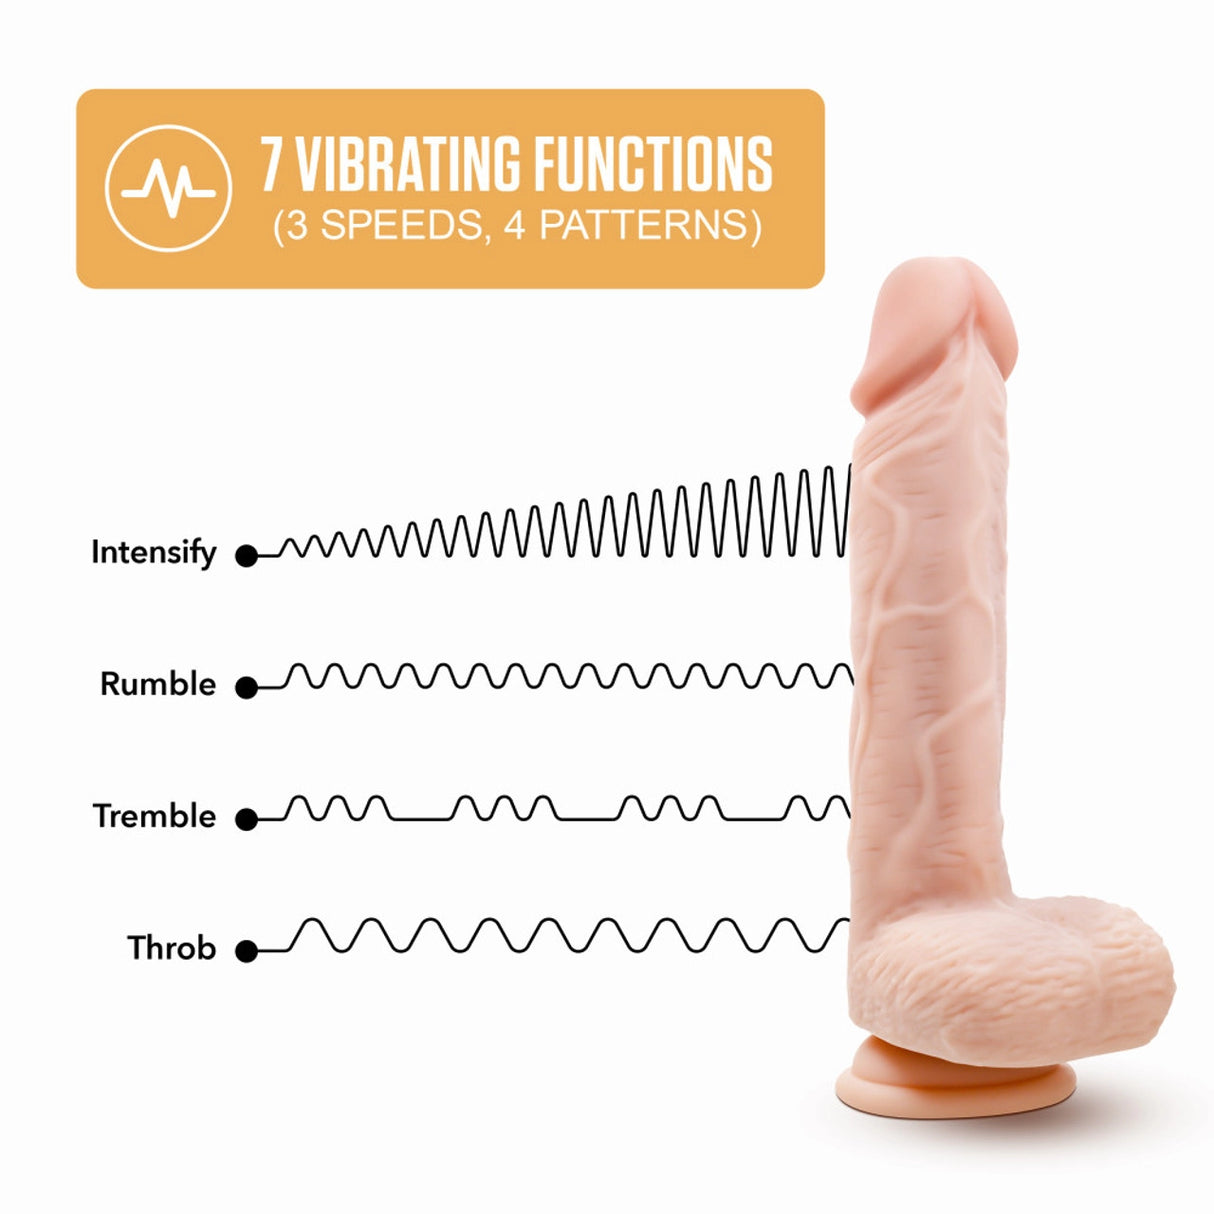 Dr. Skin Silicone Dr. Ethan Gyrating & Vibrating Dildo 8.5 inch